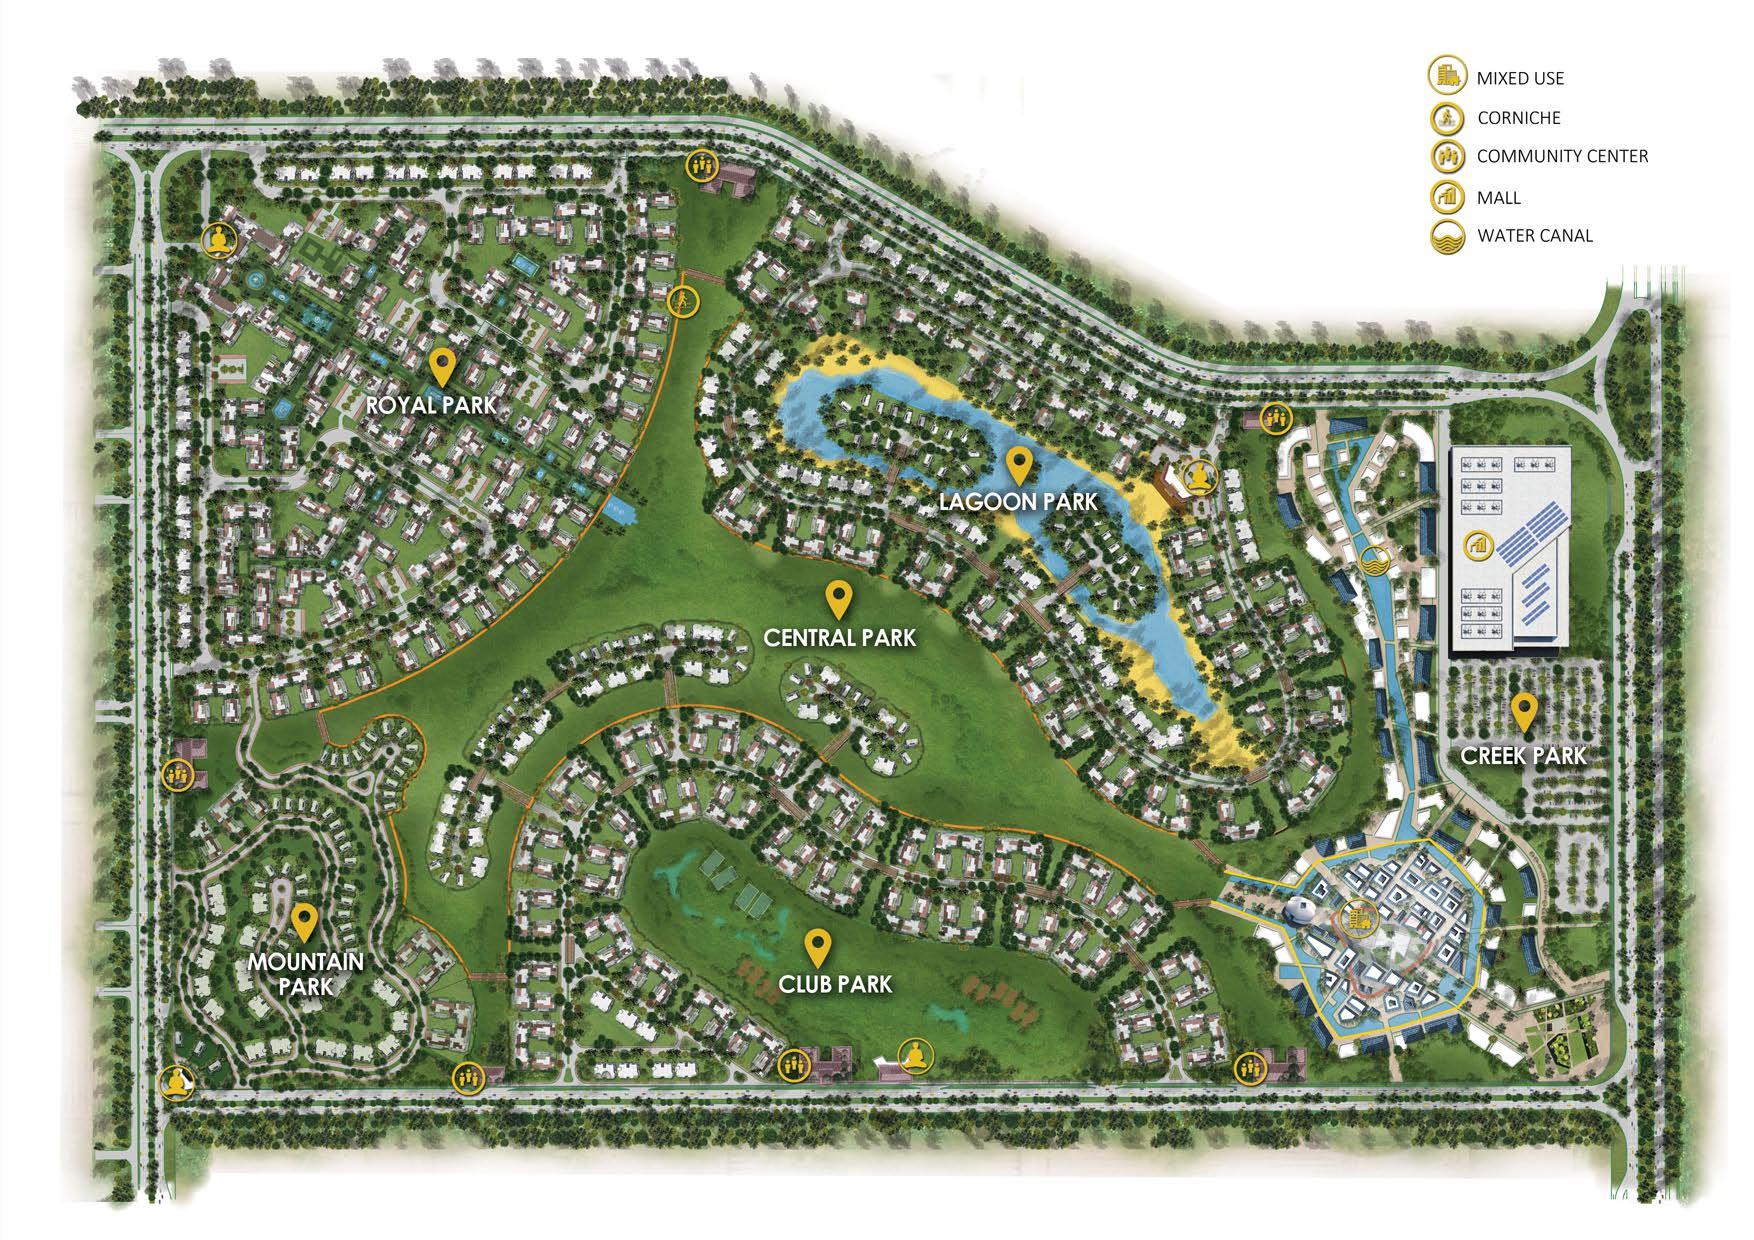 Apartments for sale in Mountain View iCity project